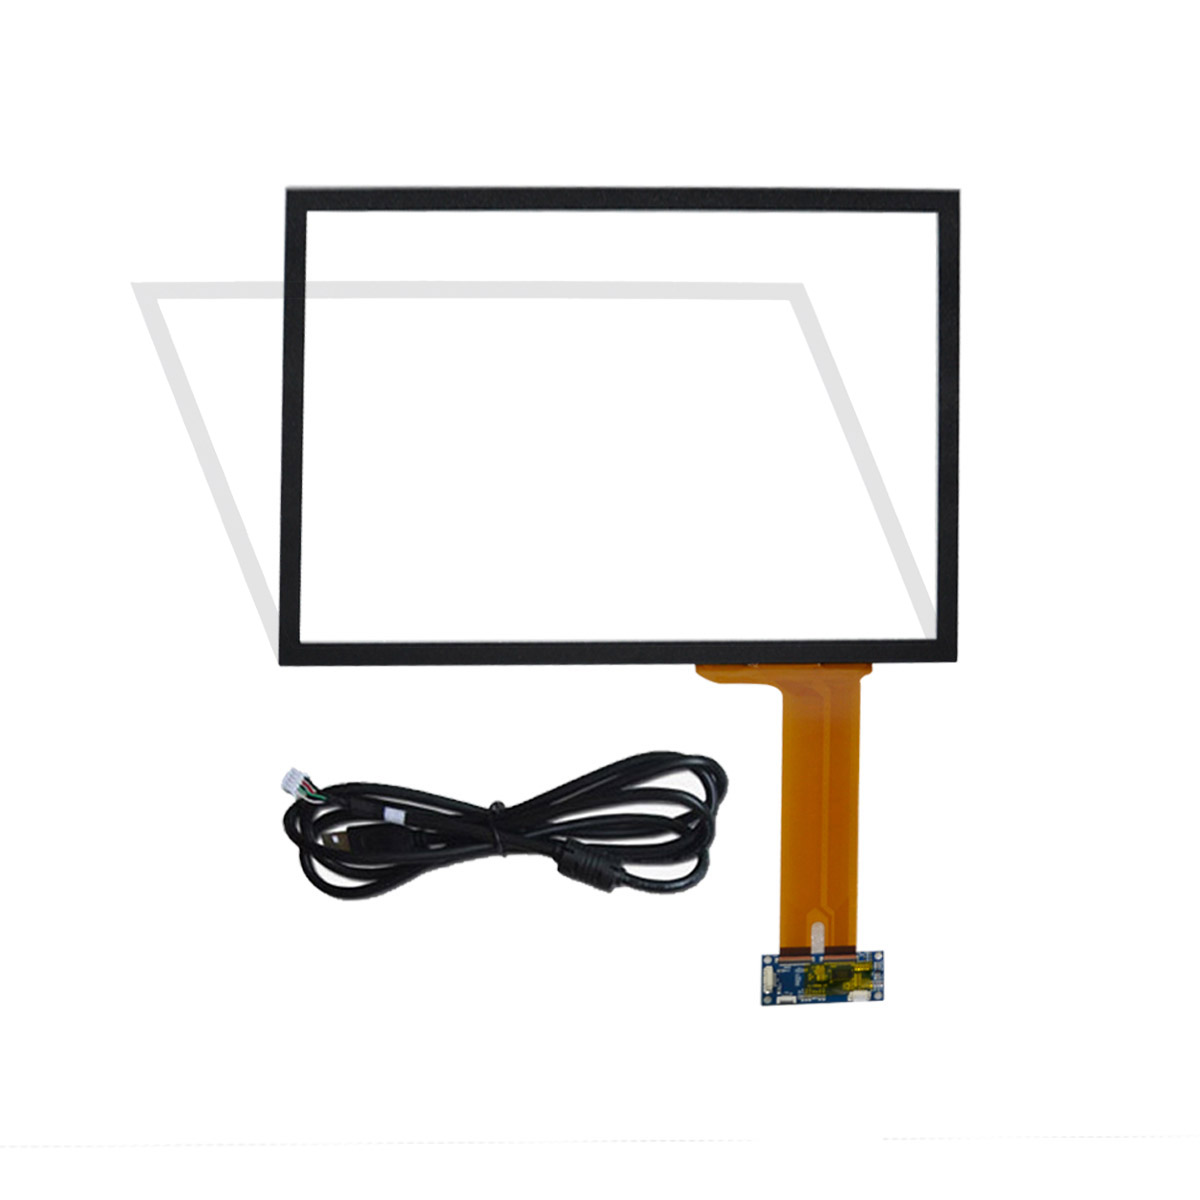 https://www.cjtouch.com/odm-oem-65-inch-high-sensitivity-capacitive-touchscreen-touch-sensor-foil-for-touch-film-digital-product/